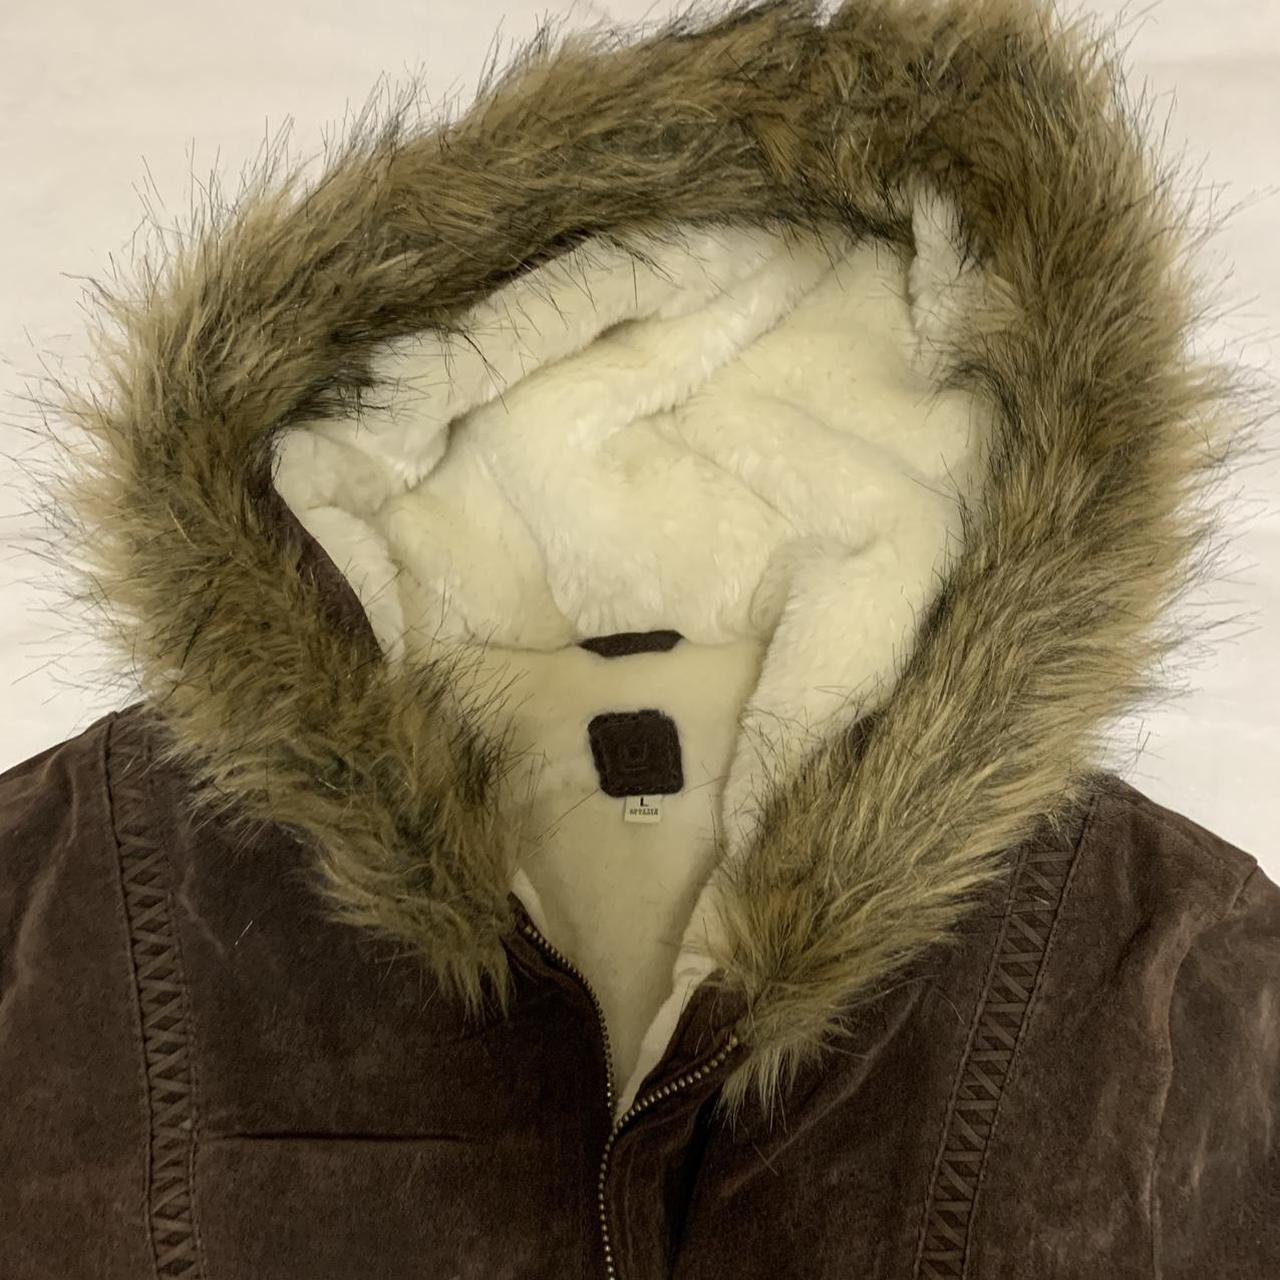 Product Image 2 - Vintage suede faux fur jacket

-from